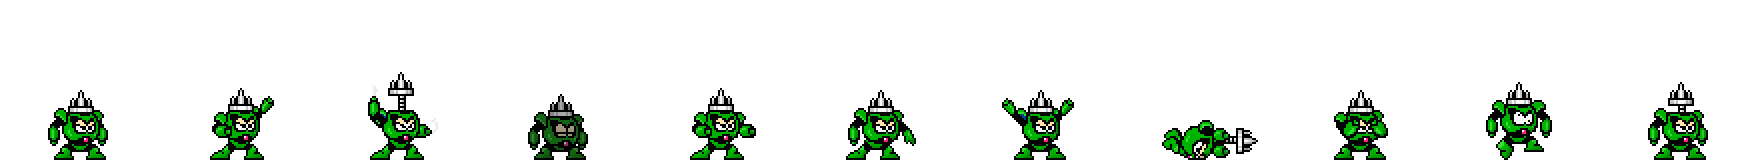 Needle Man (Emerald Alt) | Base Sprite Right<div style="margin-top: 4px; letting-spacing: 1px; font-size: 90%; font-family: Courier New; color: rgb(159, 150, 172);">[robot:right:base]{needle-man_alt2}</div>